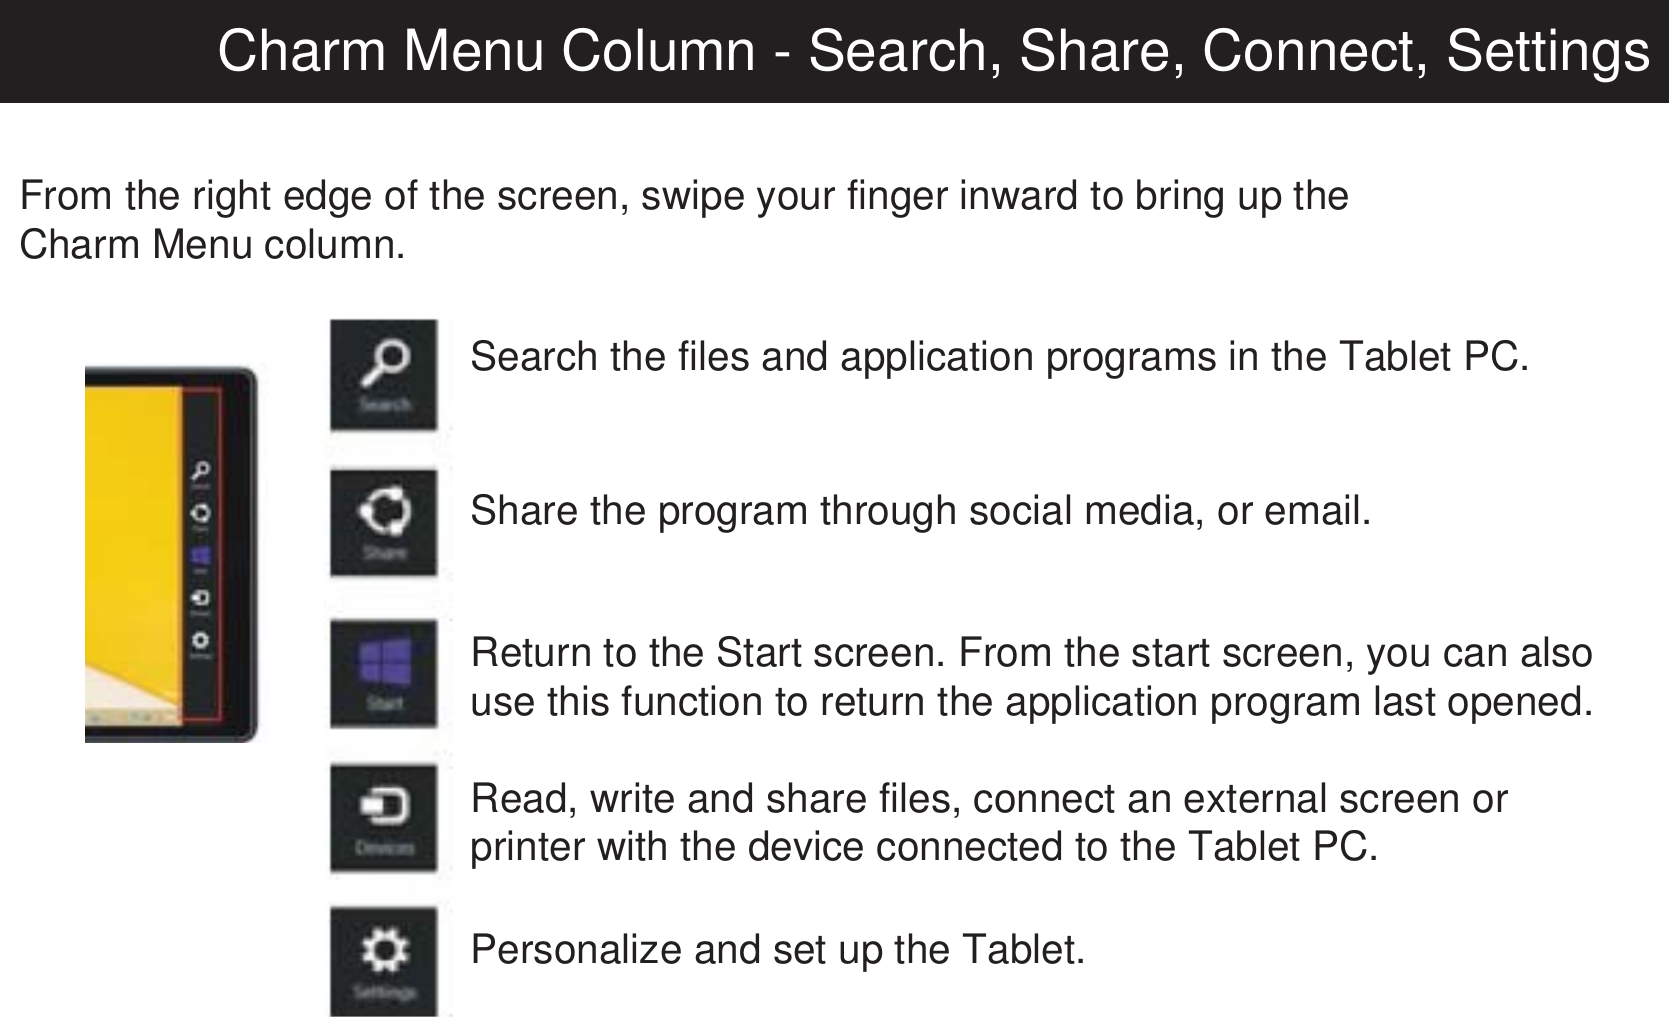 Charm Menu Column - Search, Share, Connect, SettingsFrom the right edge of the screen, swipe your finger inward to bring up theCharm Menu column.Search the files and application programs in the Tablet PC.Share the program through social media, or email.Return to the Start screen. From the start screen, you can also use this function to return the application program last opened.Read, write and share files, connect an external screen or printer with the device connected to the Tablet PC.Personalize and set up the Tablet.